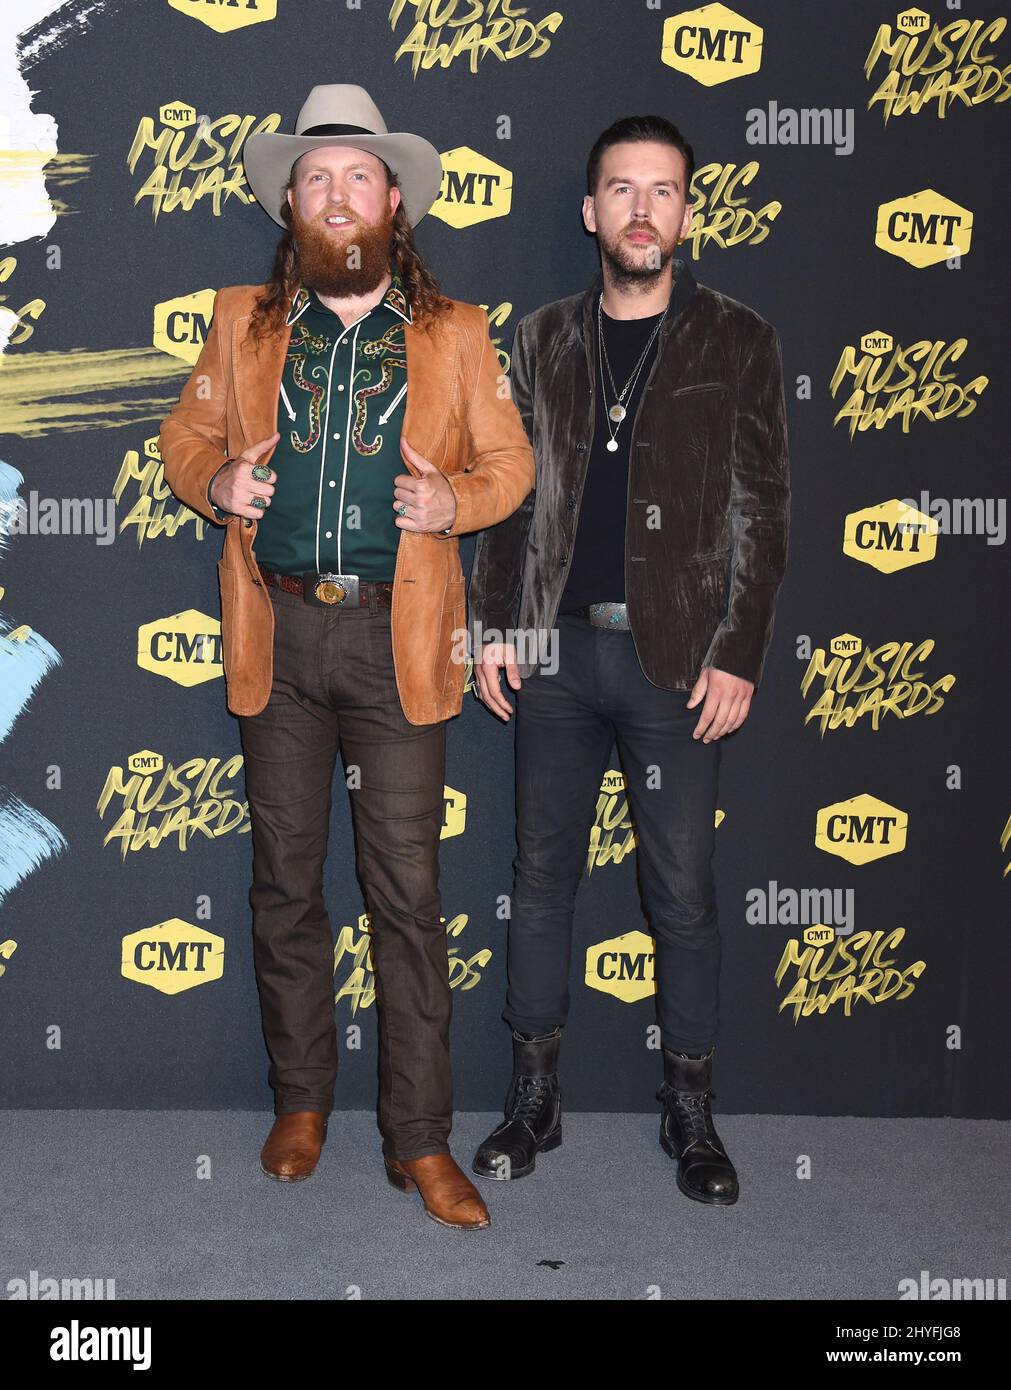 Brothers Osborne at the 2018 CMT Music Awards held at Bridgestone Arena on June 6, 2018 in Nashville, Tennessee Stock Photo